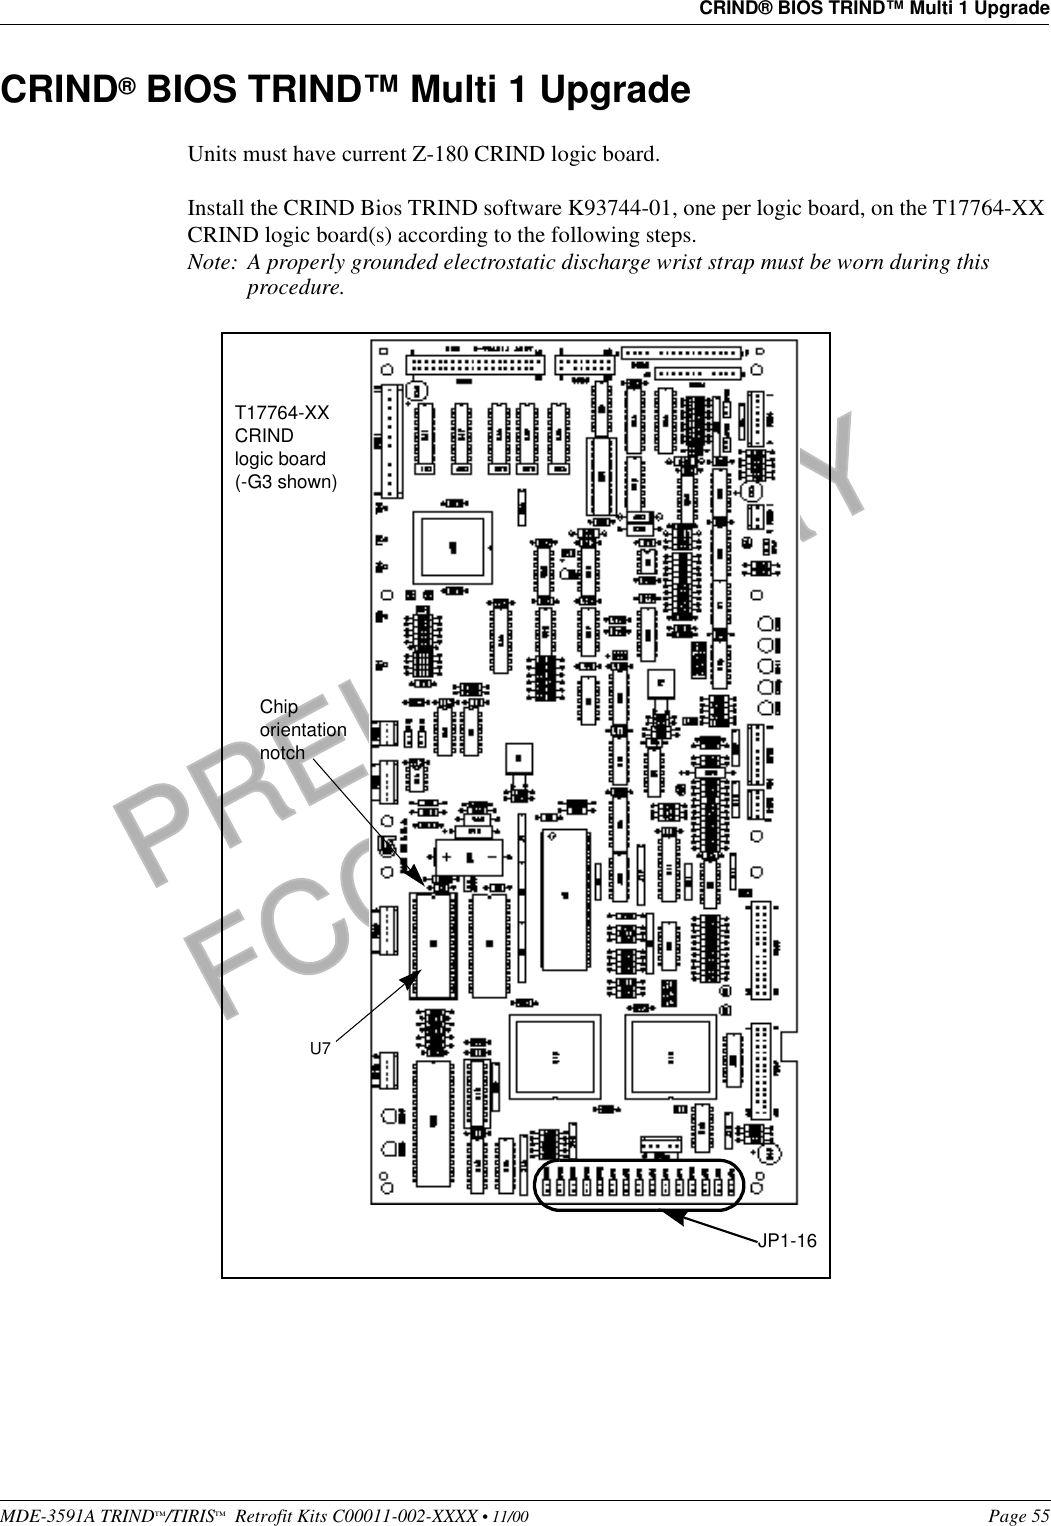 MDE-3591A TRIND™/TIRIS™  Retrofit Kits C00011-002-XXXX • 11/00 Page 55CRIND® BIOS TRIND™ Multi 1 UpgradePRELIMINARYFCC 11/30CRIND® BIOS TRIND™ Multi 1 UpgradeUnits must have current Z-180 CRIND logic board. Install the CRIND Bios TRIND software K93744-01, one per logic board, on the T17764-XX CRIND logic board(s) according to the following steps.Note: A properly grounded electrostatic discharge wrist strap must be worn during this procedure. U7 Chip orientation notchT17764-XX CRIND logic board (-G3 shown)JP1-16